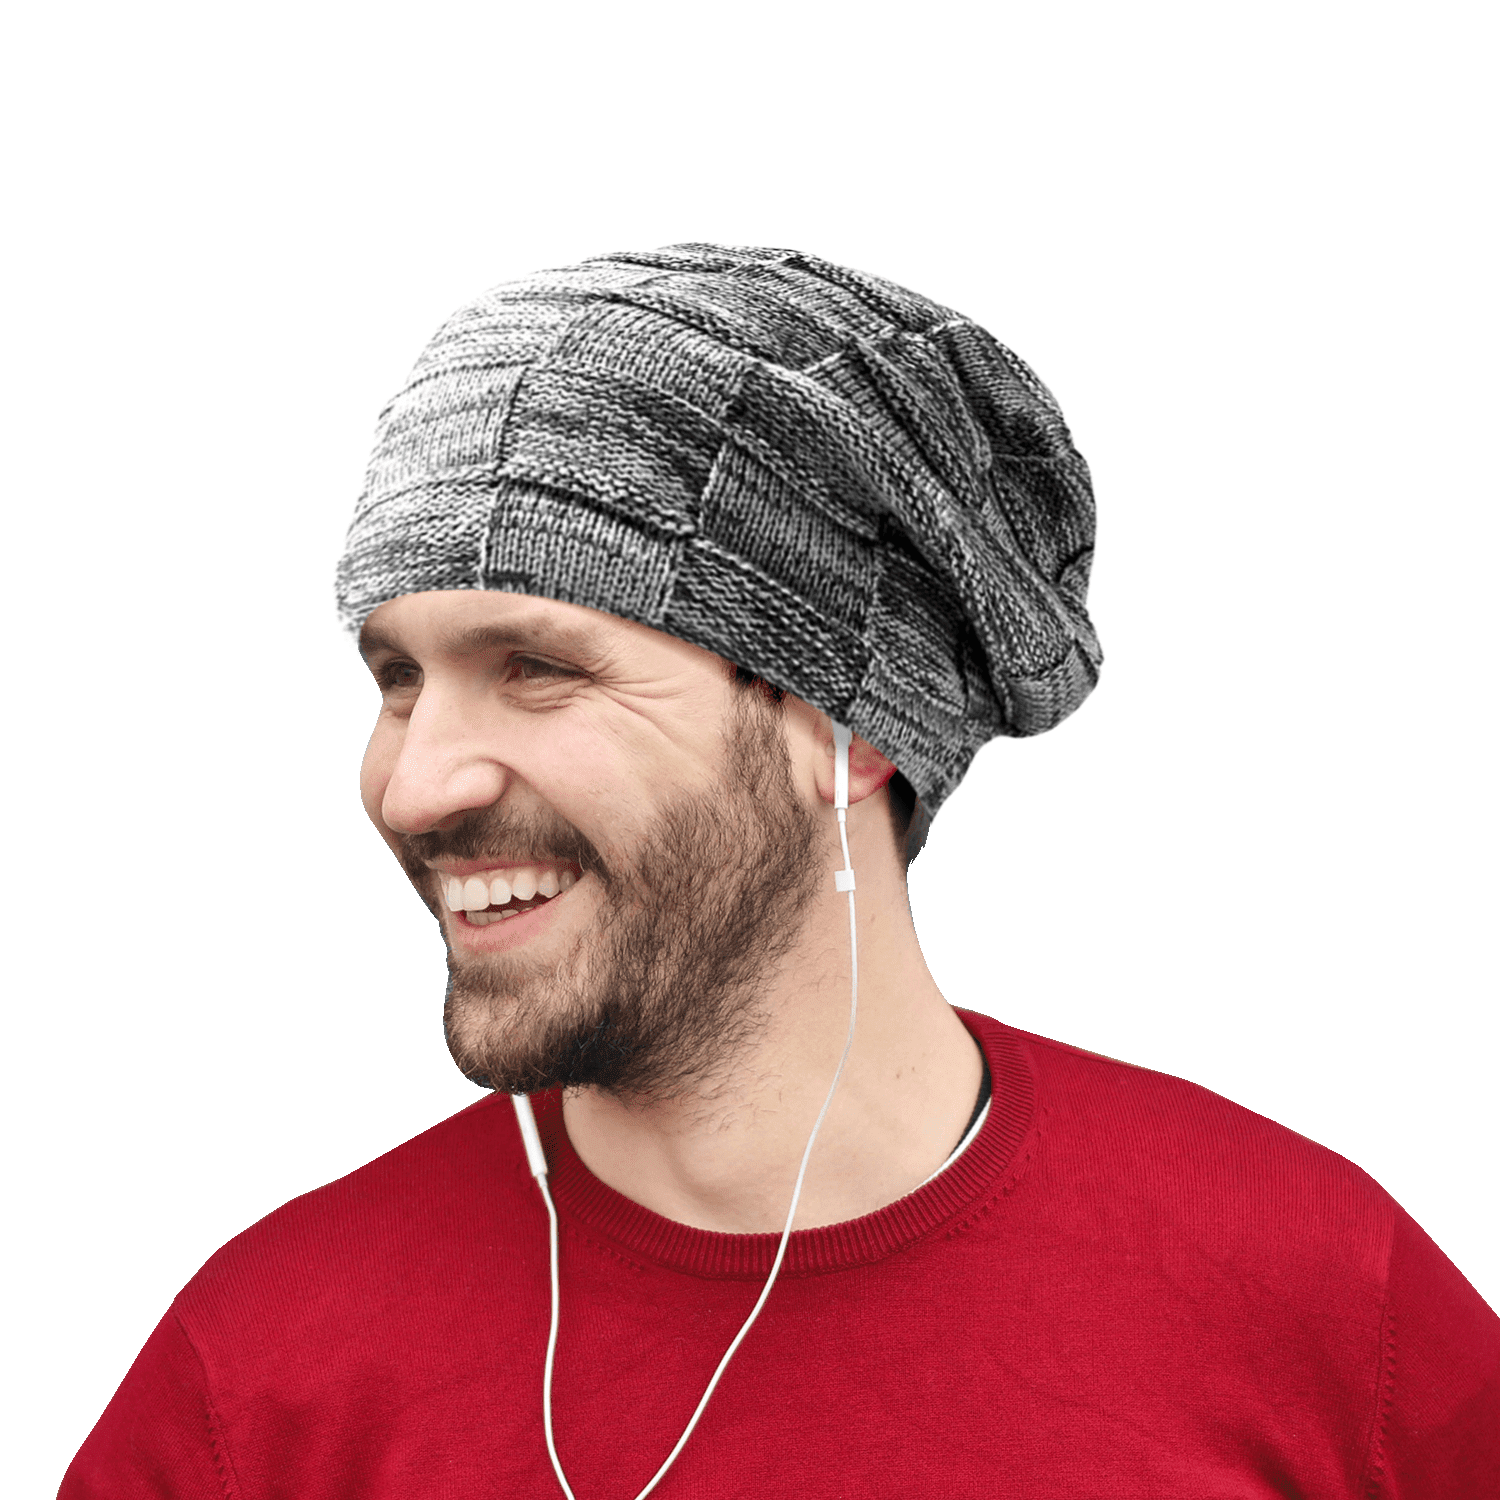 Benjamin Slouchy Beanie for -Winter Warm Lined Knit Hat for Guys Soft Thick Warm One Size, Gray - Walmart.com